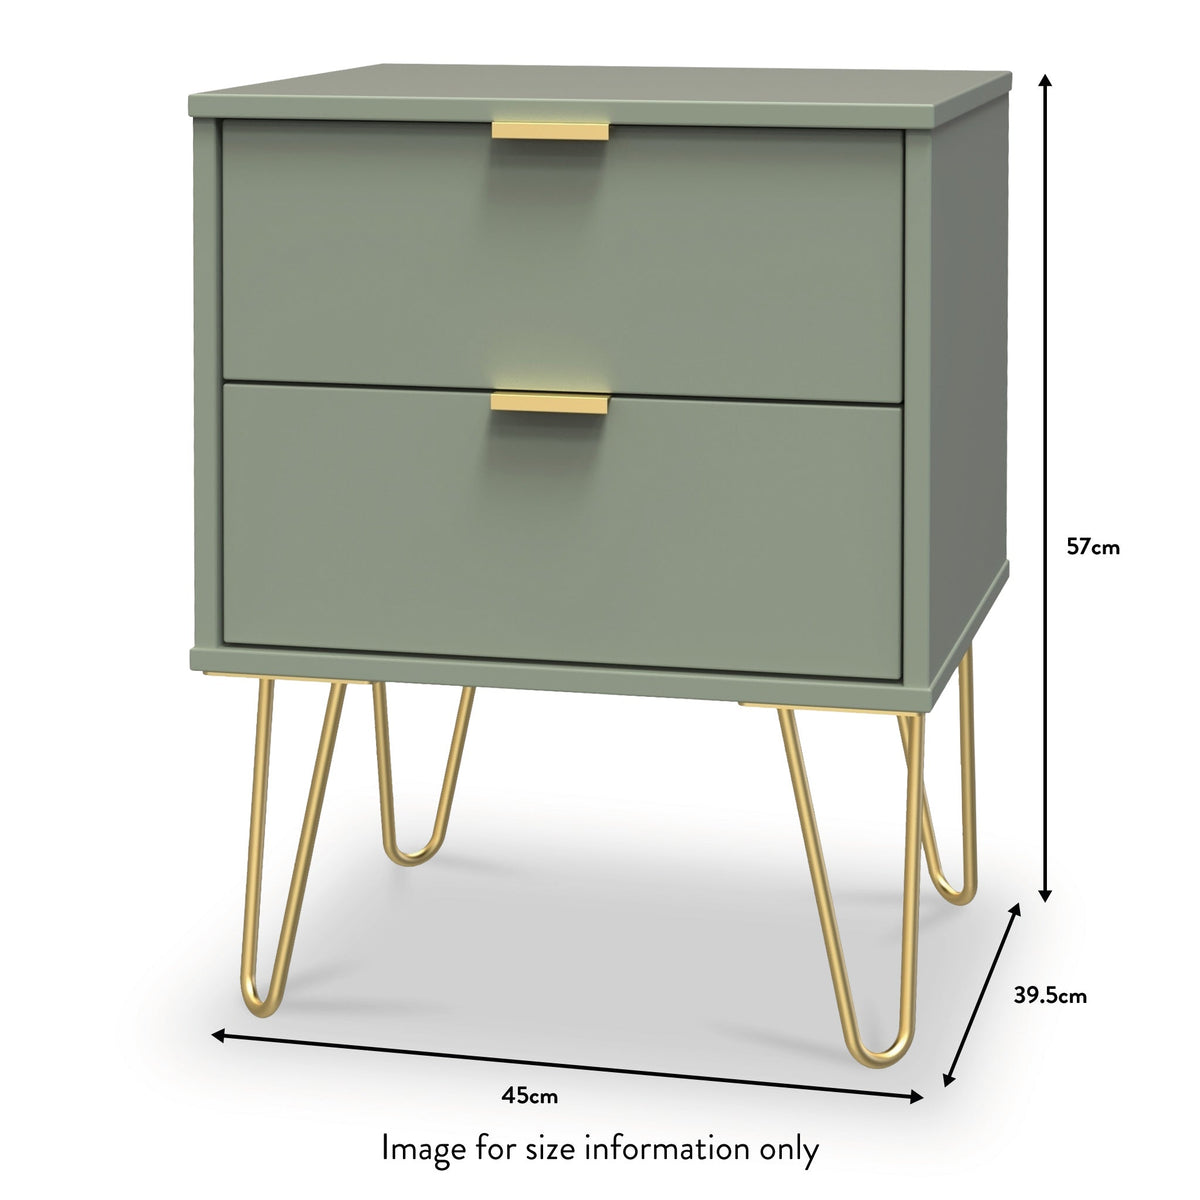 Moreno Olive Green 2 Drawer Bedside Table with Gold Hairpin Legs dimensions guide